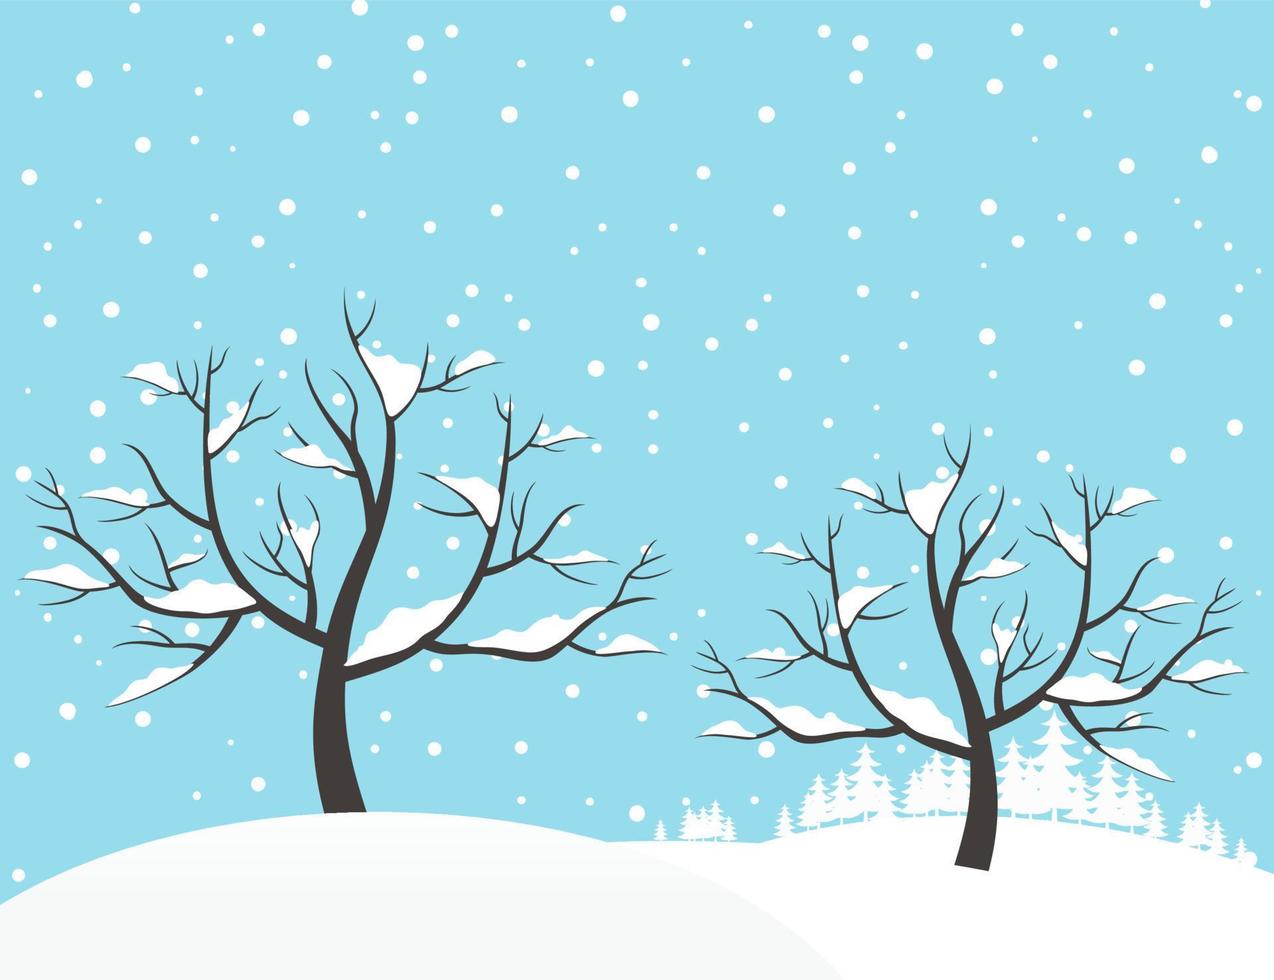 Trees in the winter. Vector illustration